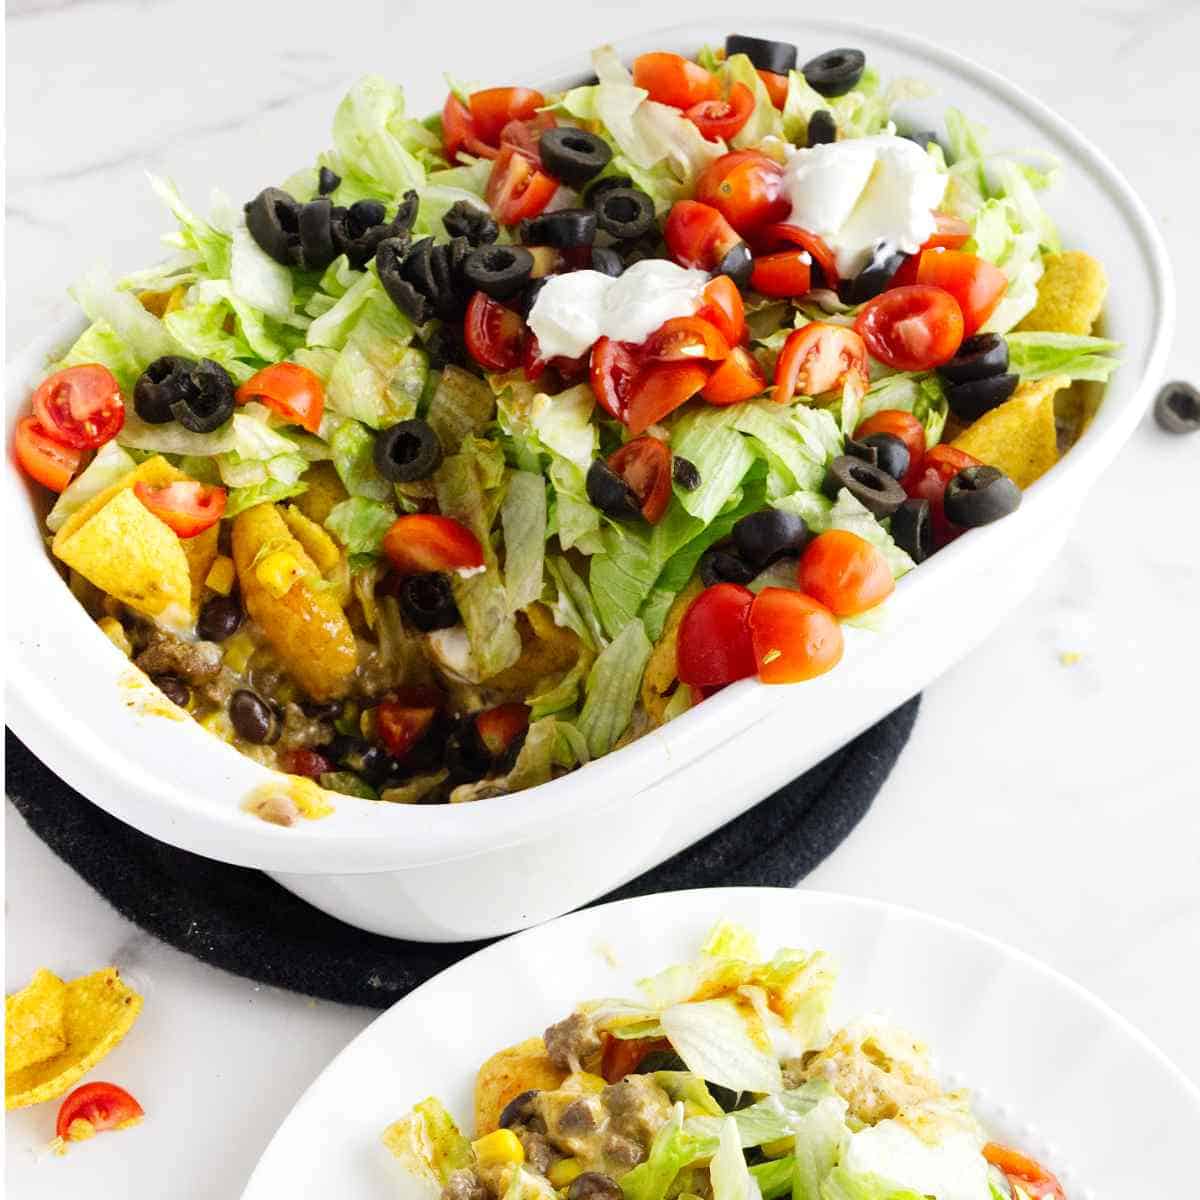 layered walking taco casserole with lettuce, tomato, sour cream, salsa, and olives on top.